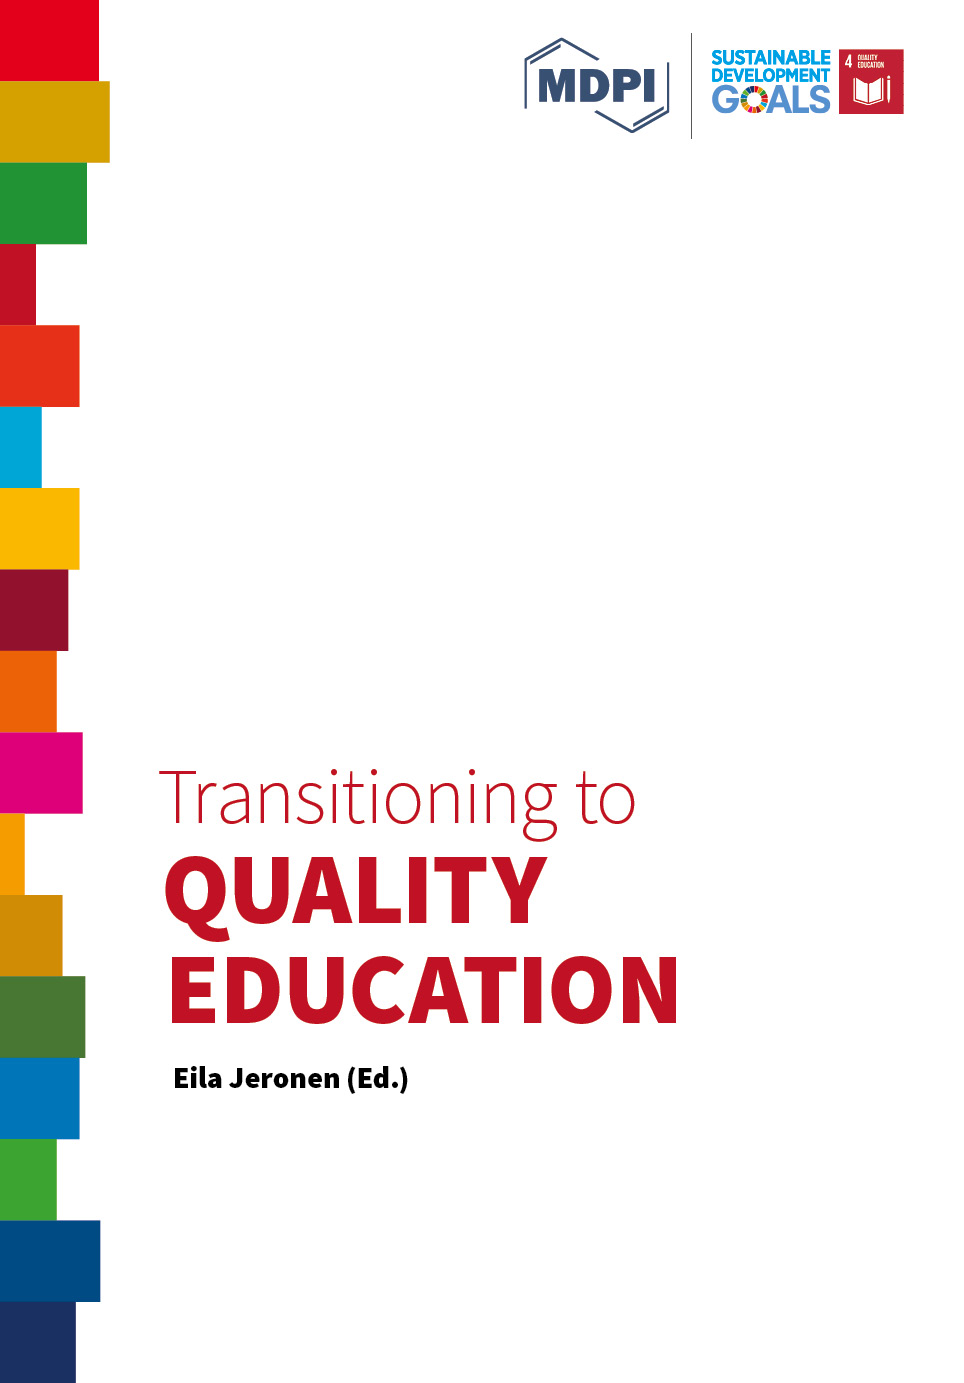 Transitioning to Quality Education